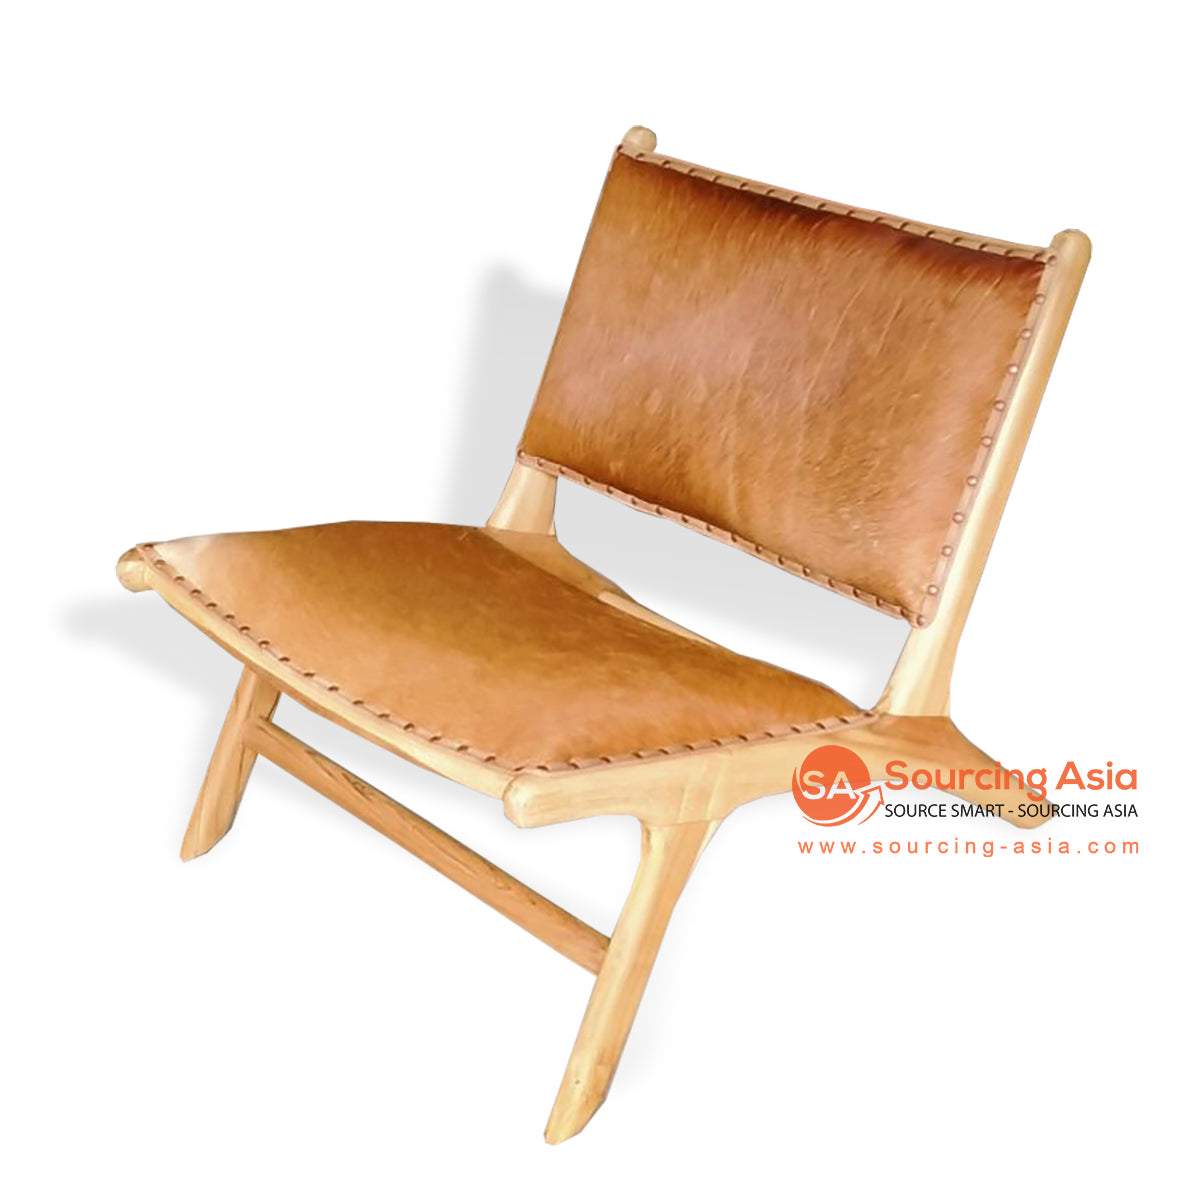 IJF018 NATURAL TEAK WOOD AND BROWN COWHIDE LEATHER MARLBORO CHAIR WITH ARMS